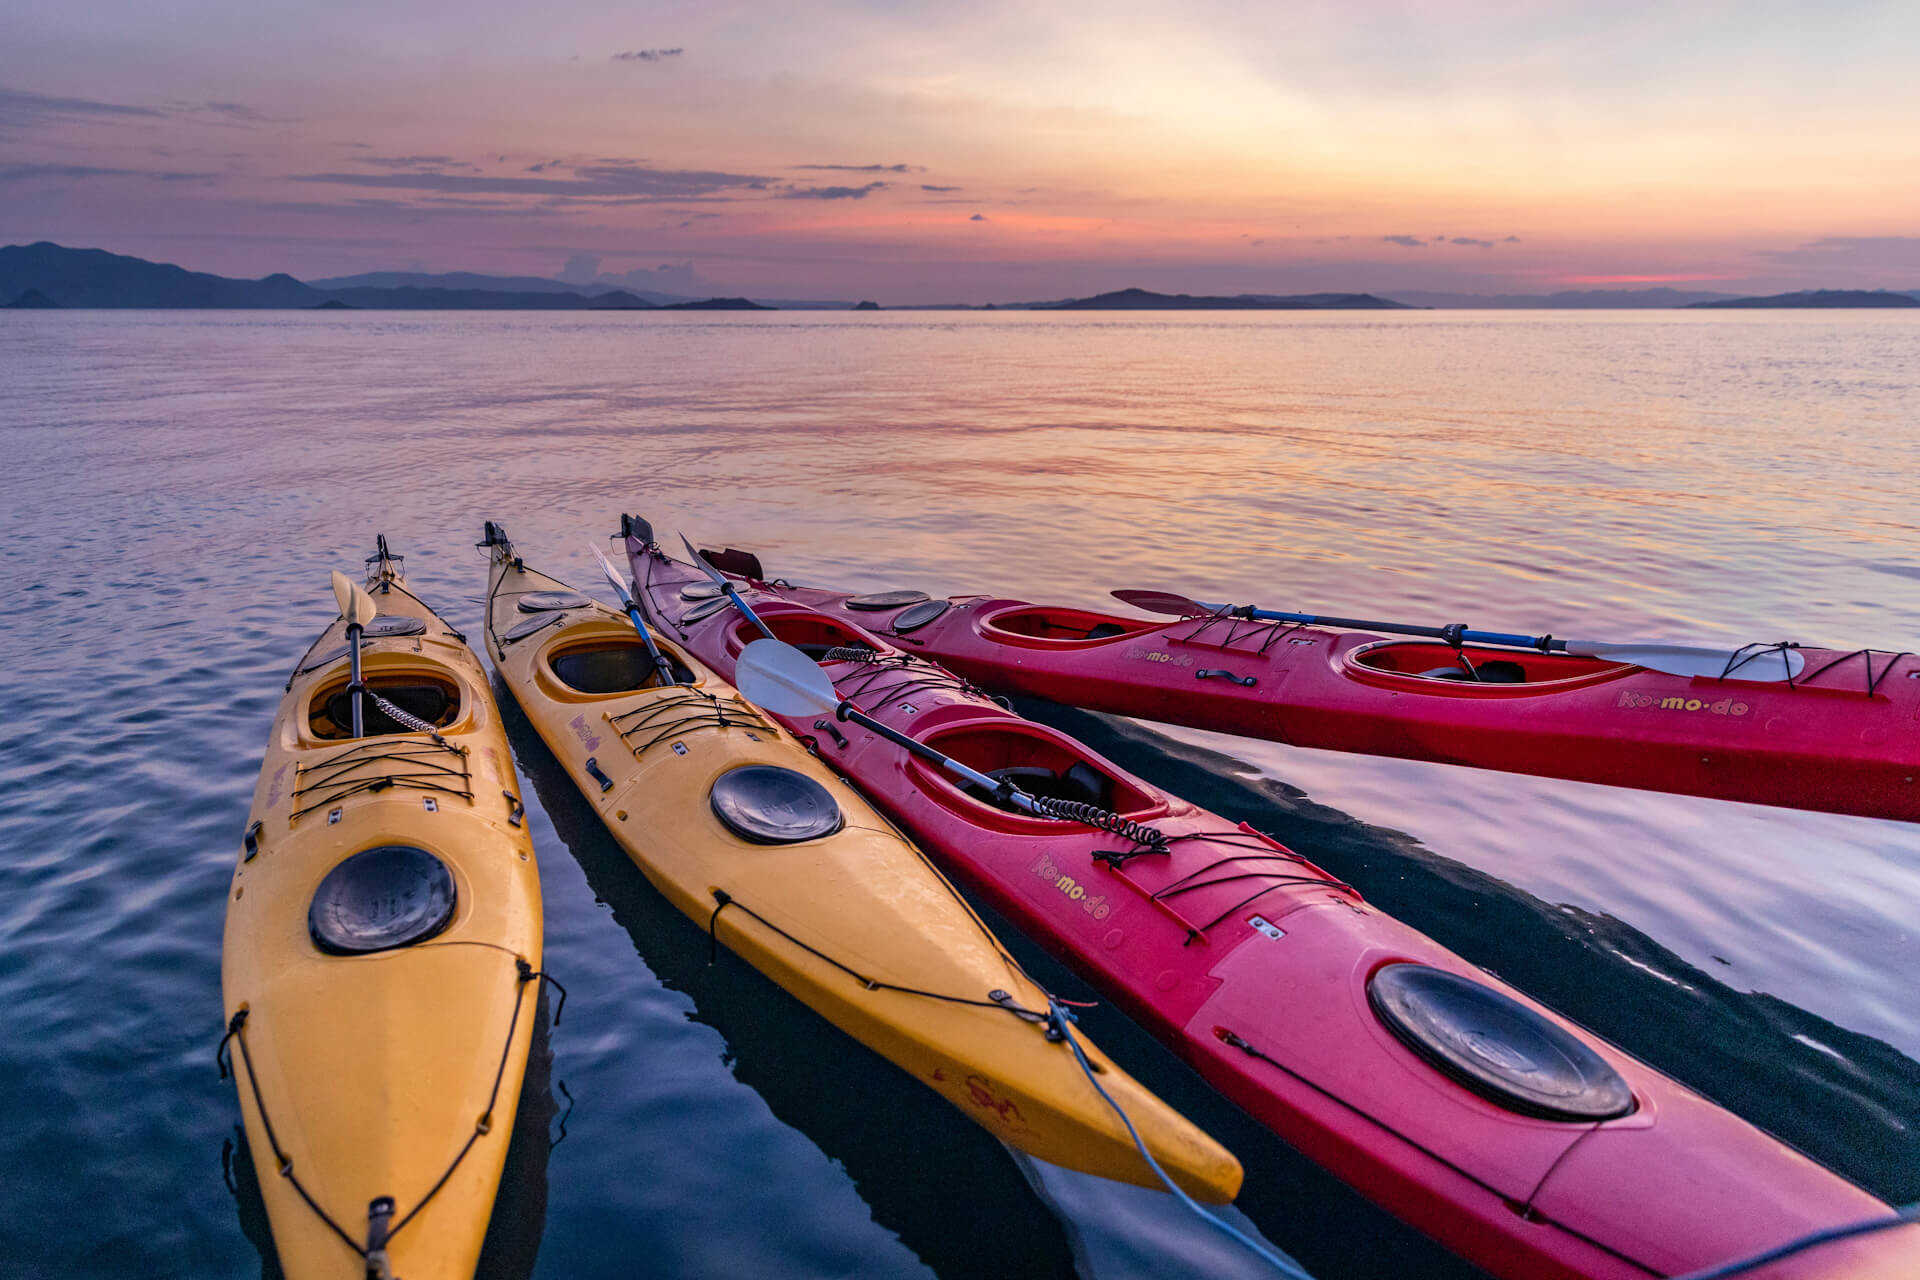 Komodo,Indonesia, colorful Kayaks bound together on the ocean at sunset